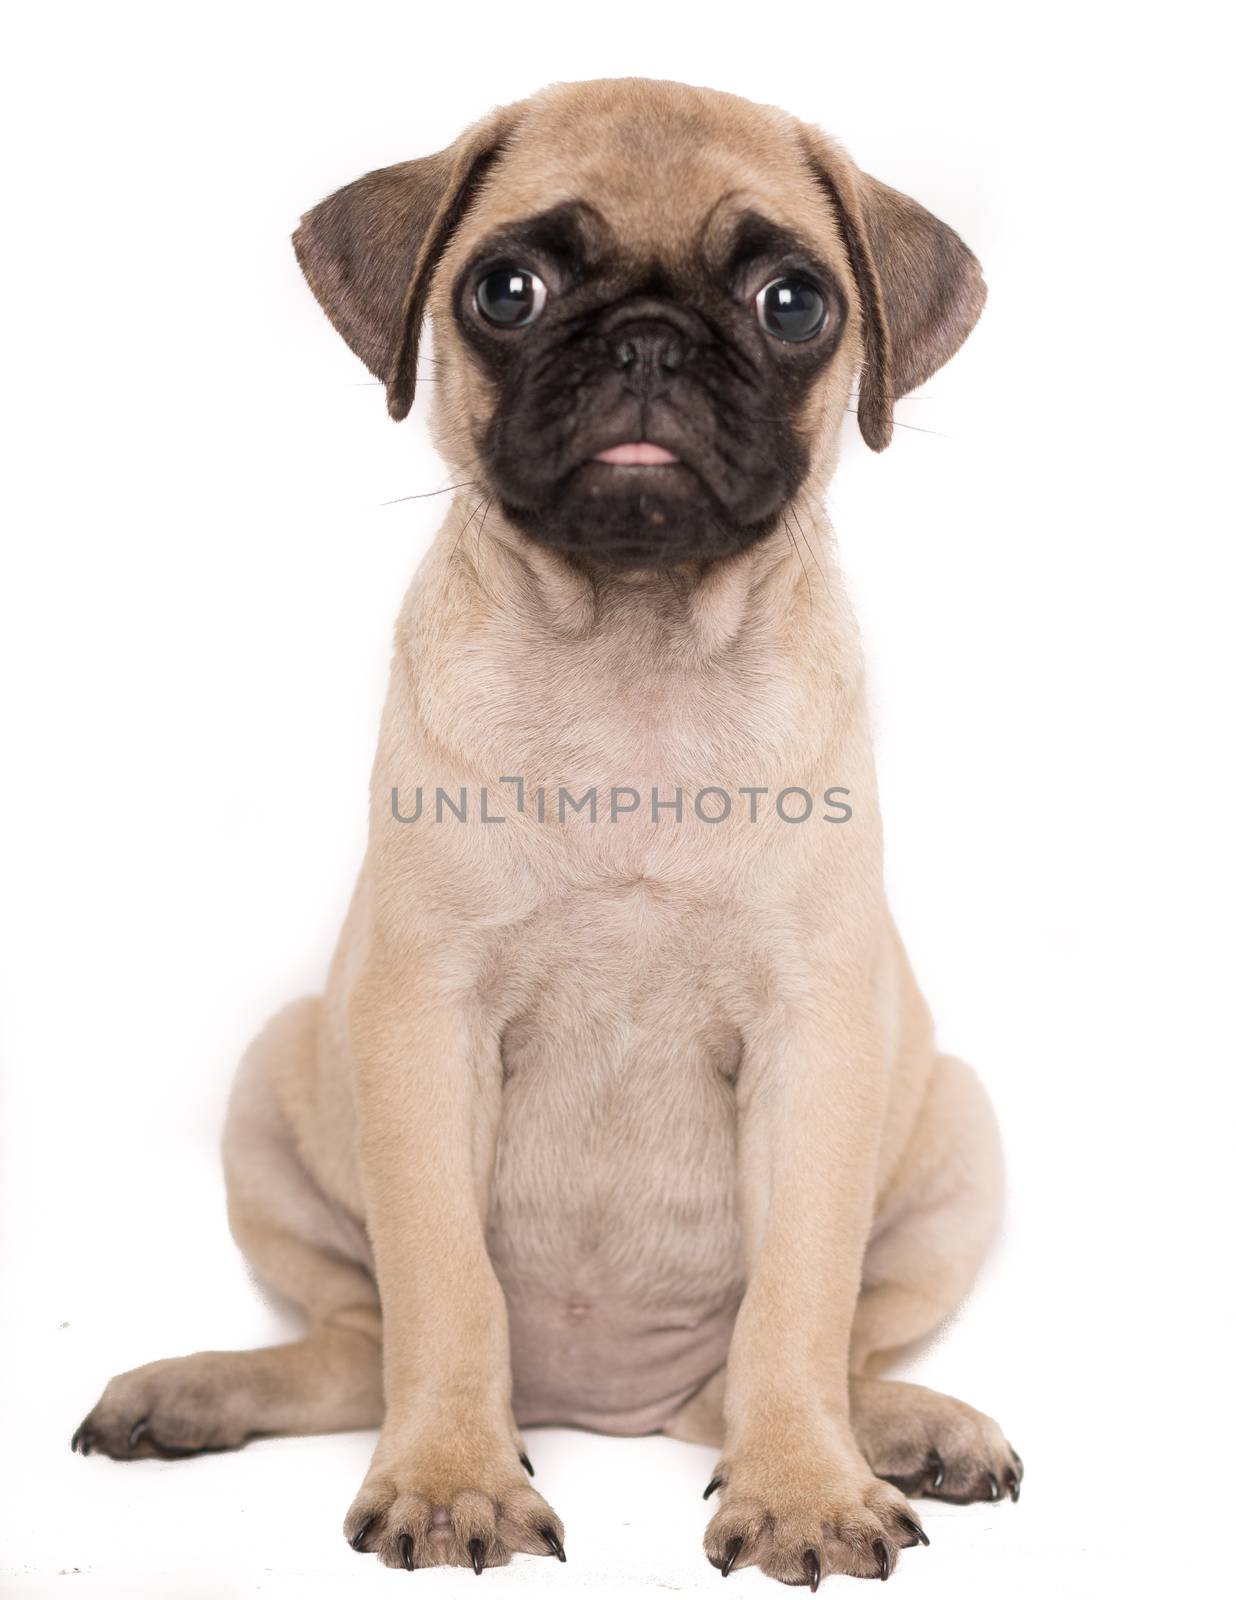 Pug, portrait of a puppy small lovely dog looking at camera isolated on white bakcground